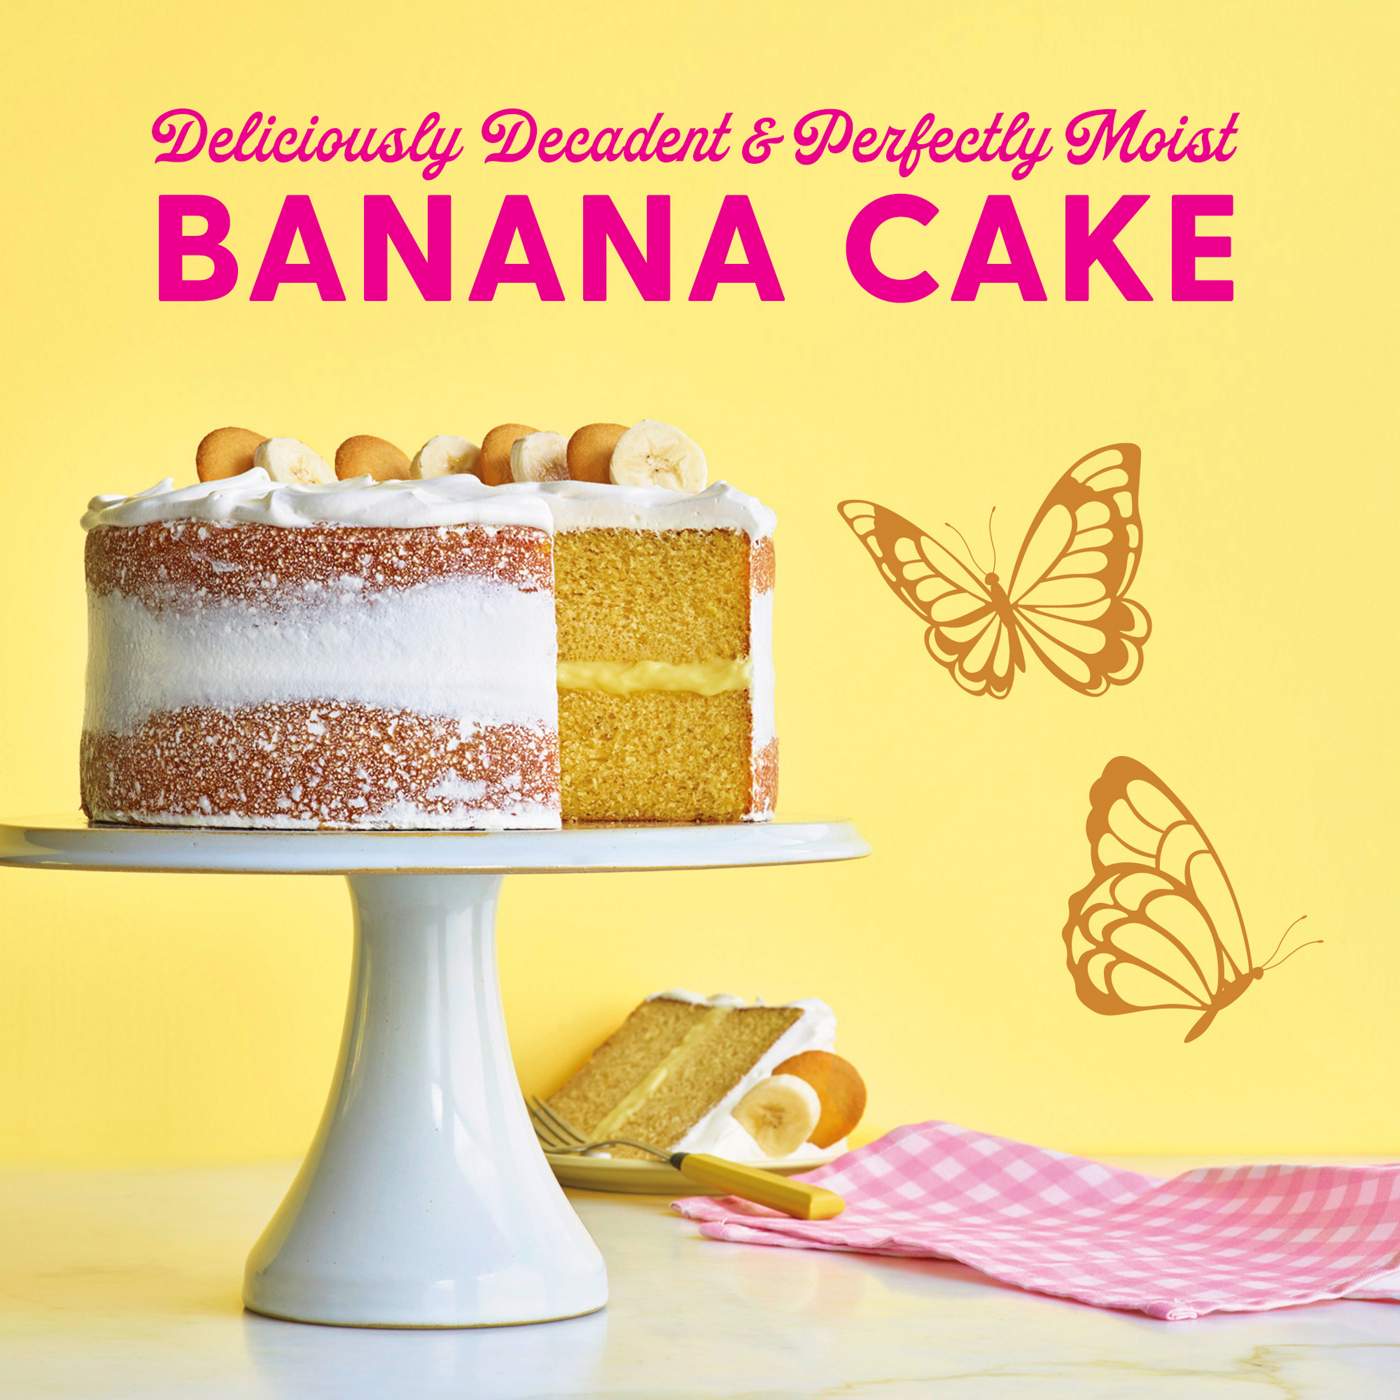 Duncan Hines Dolly Parton's Favorite Southern-Style Banana Flavored Cake Mix; image 4 of 7